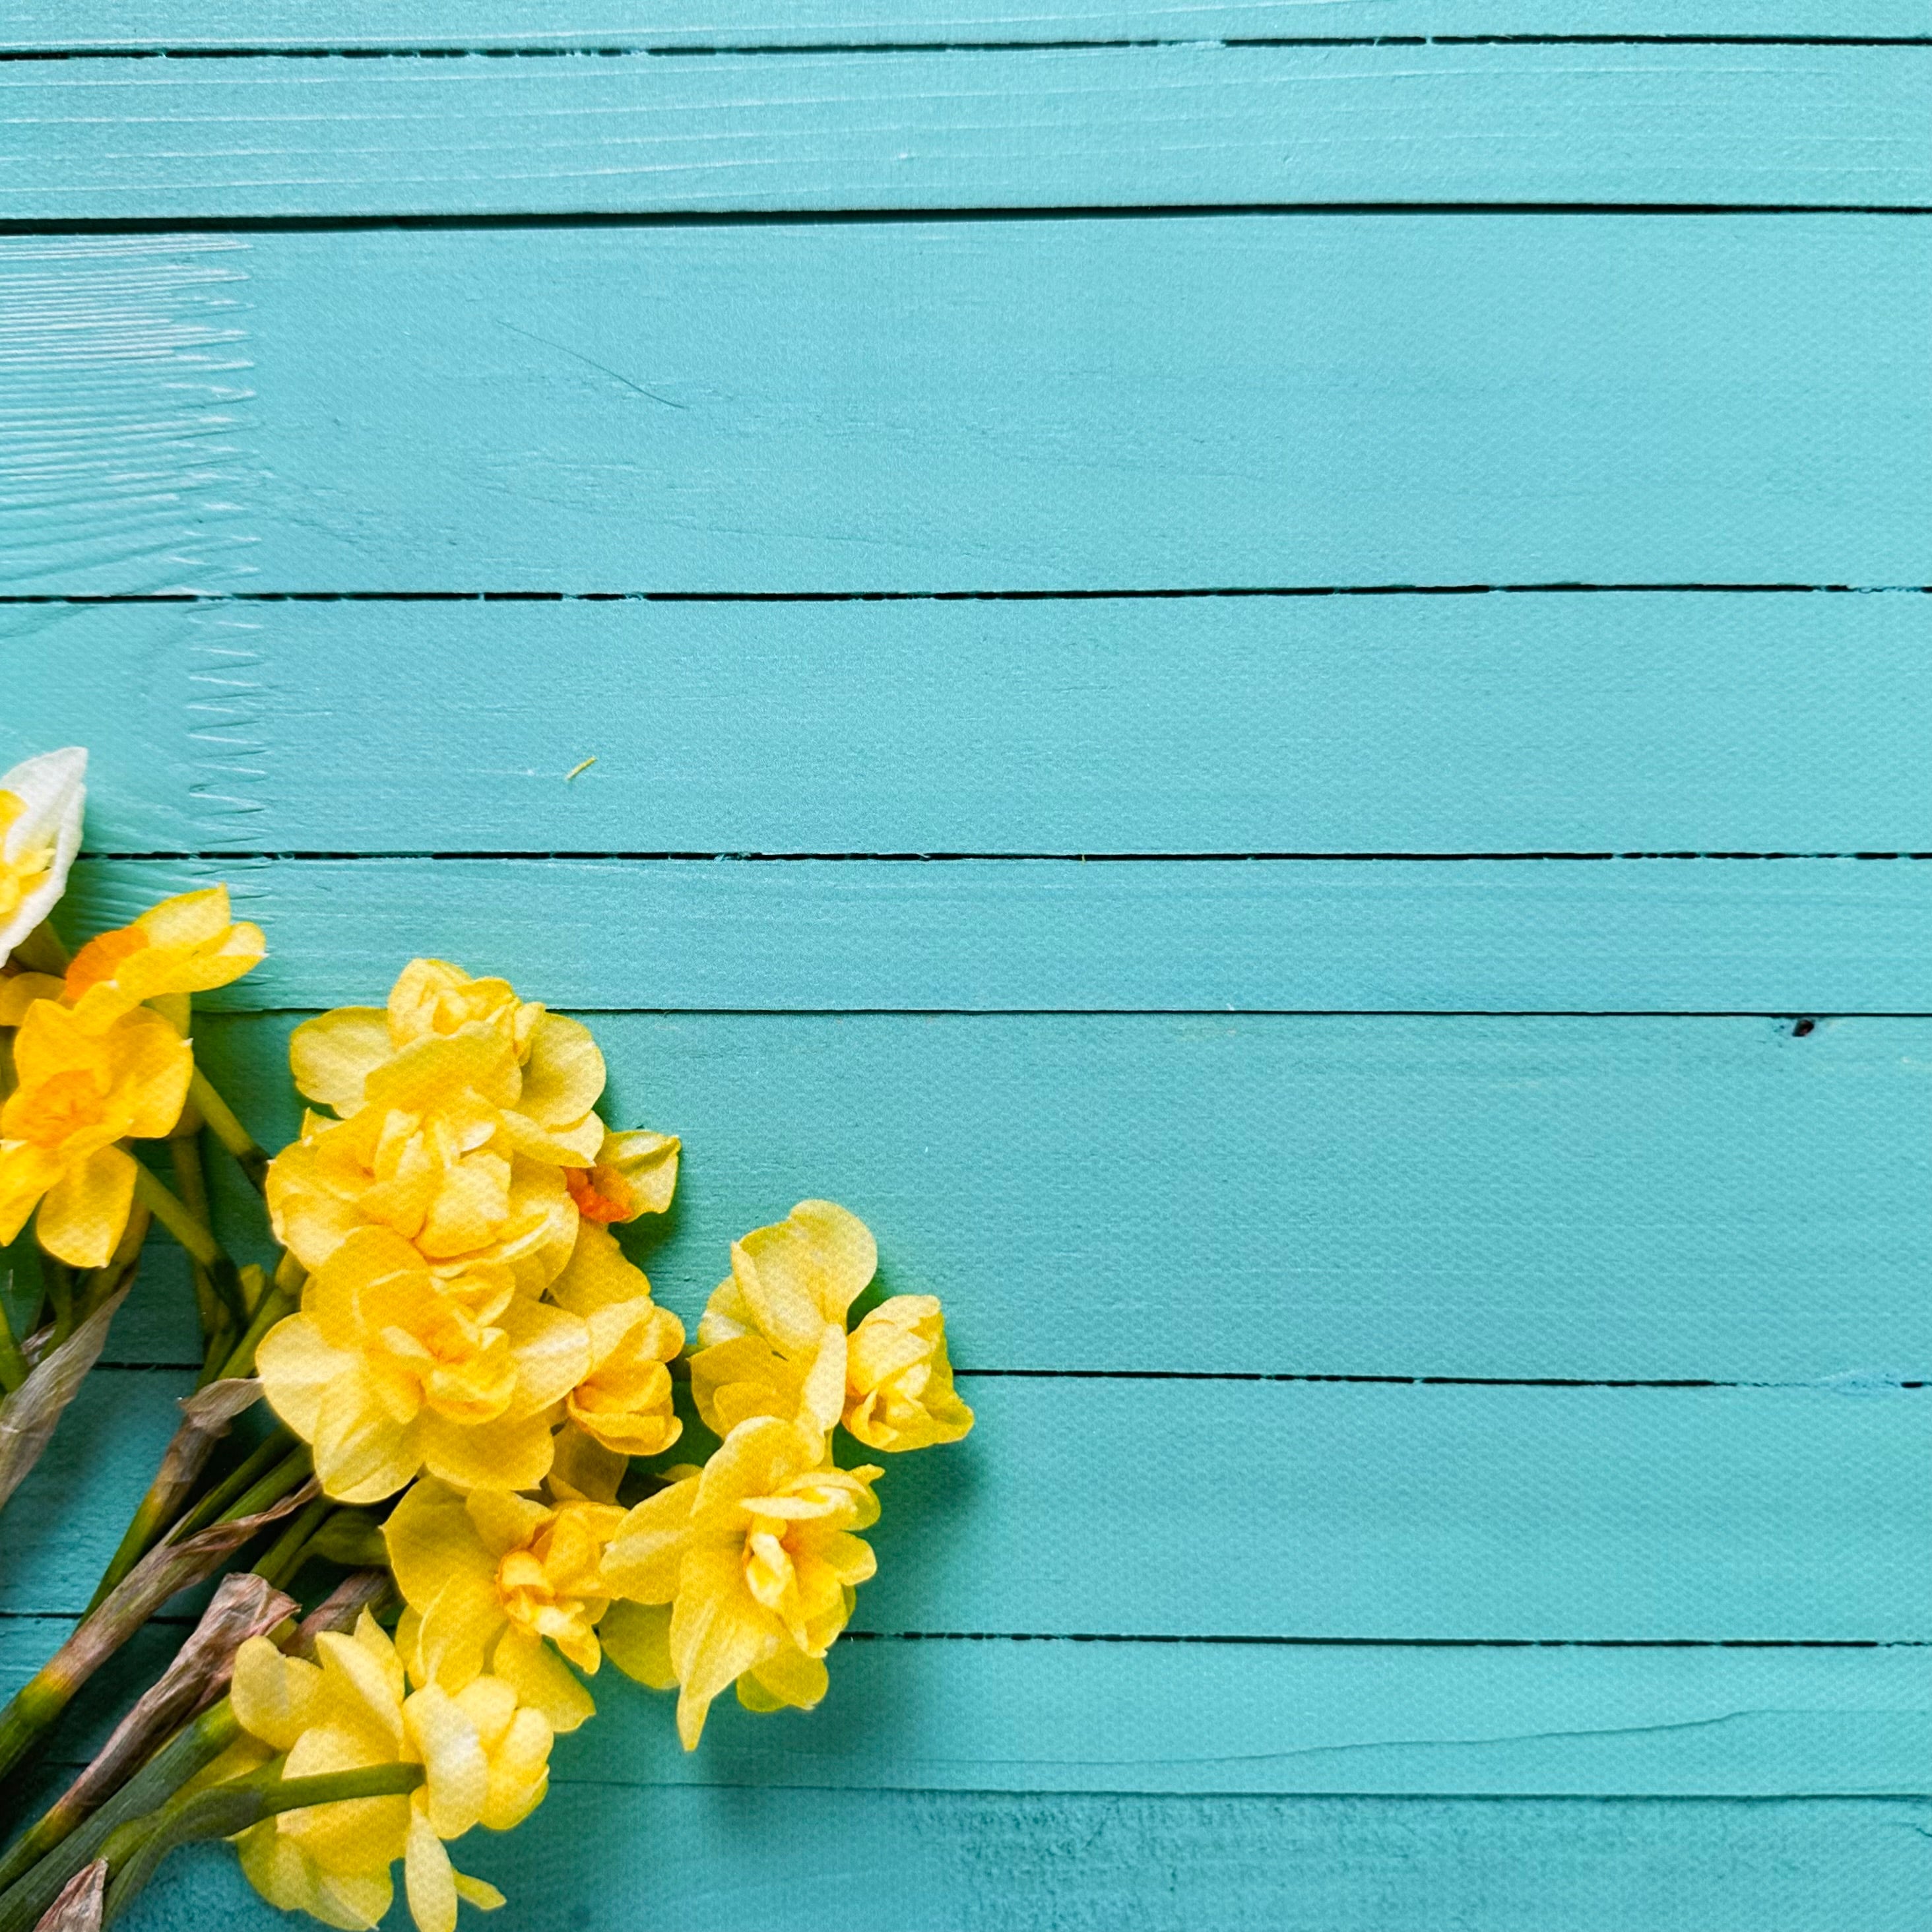 Daffodils Bright Wooden Effect Canvas Photography Background